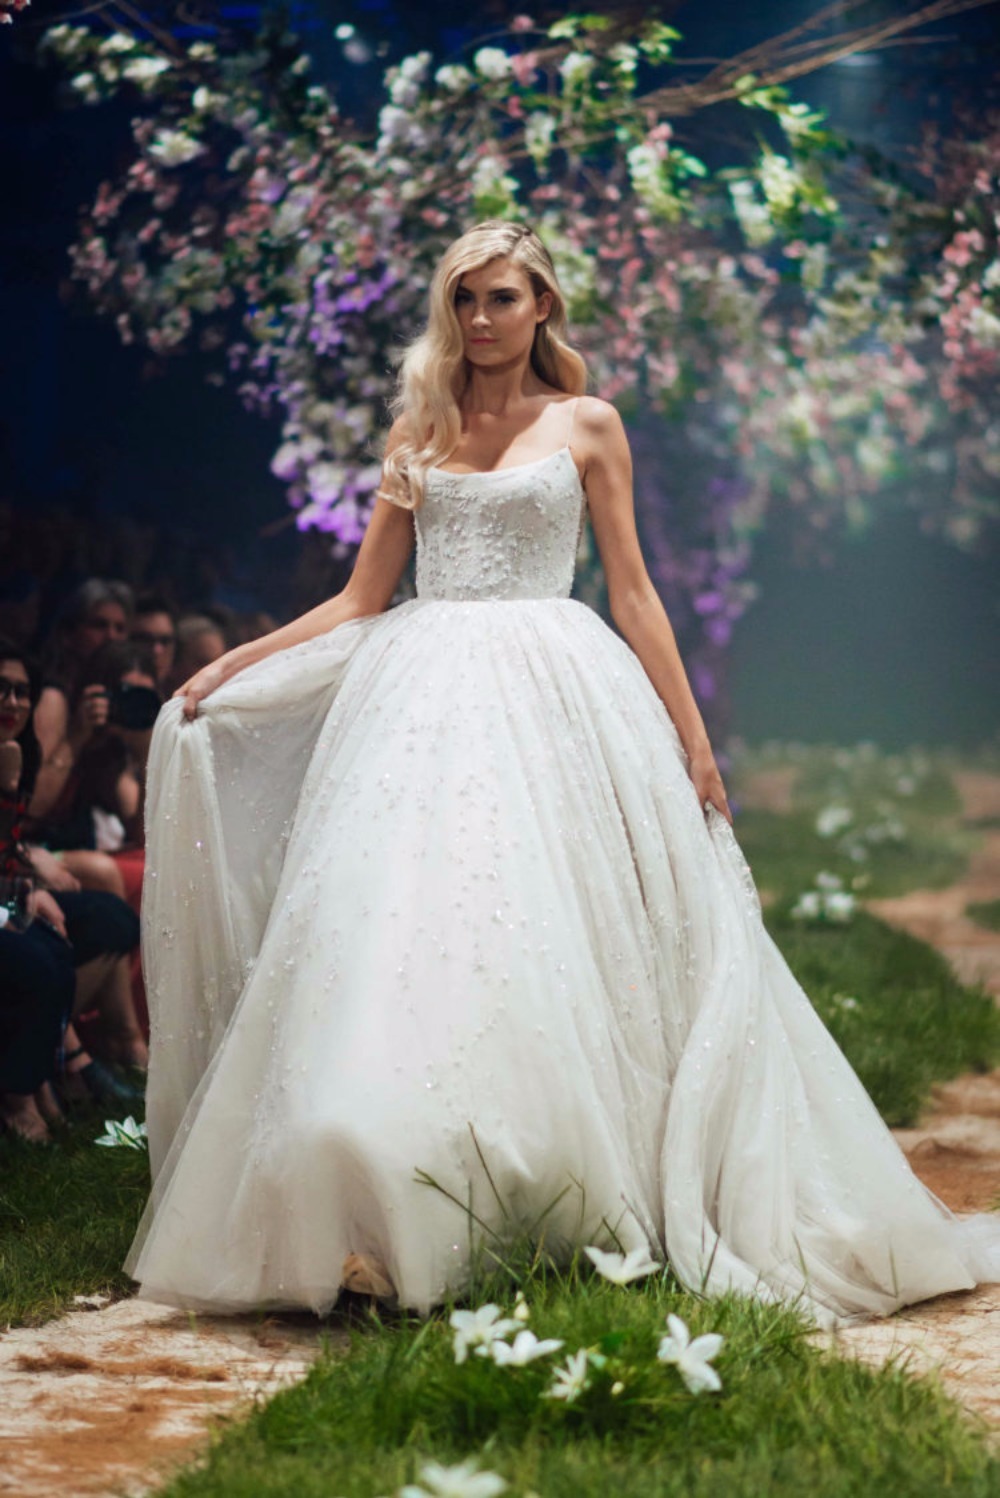 620902_new-disney-wedding-dresses-by-paolo